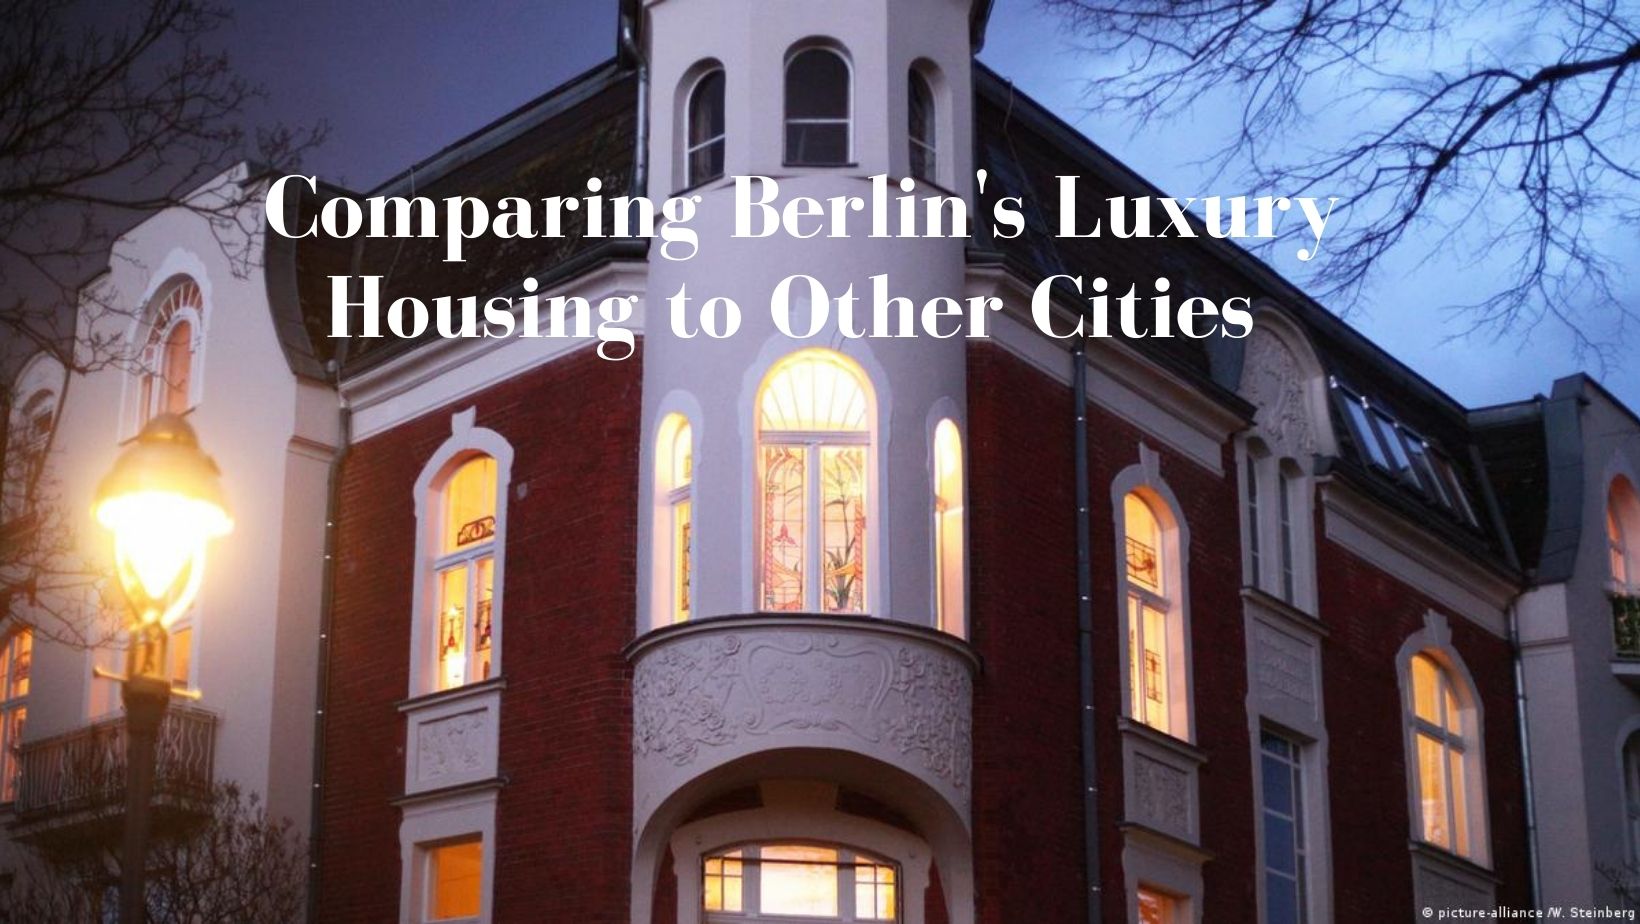 Comparing berlin's luxury housing to other cities.